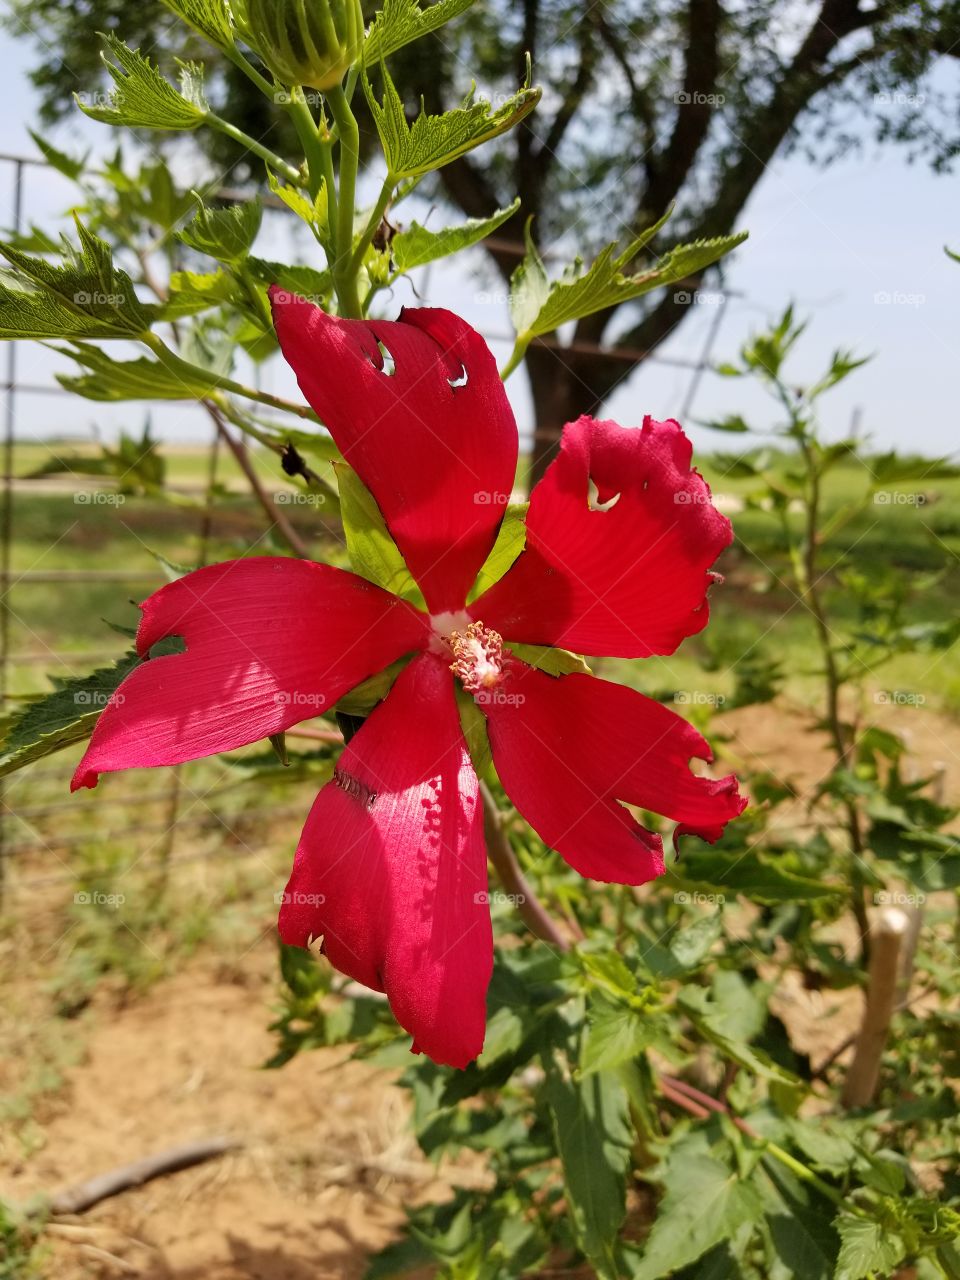 flower of a hibiscus